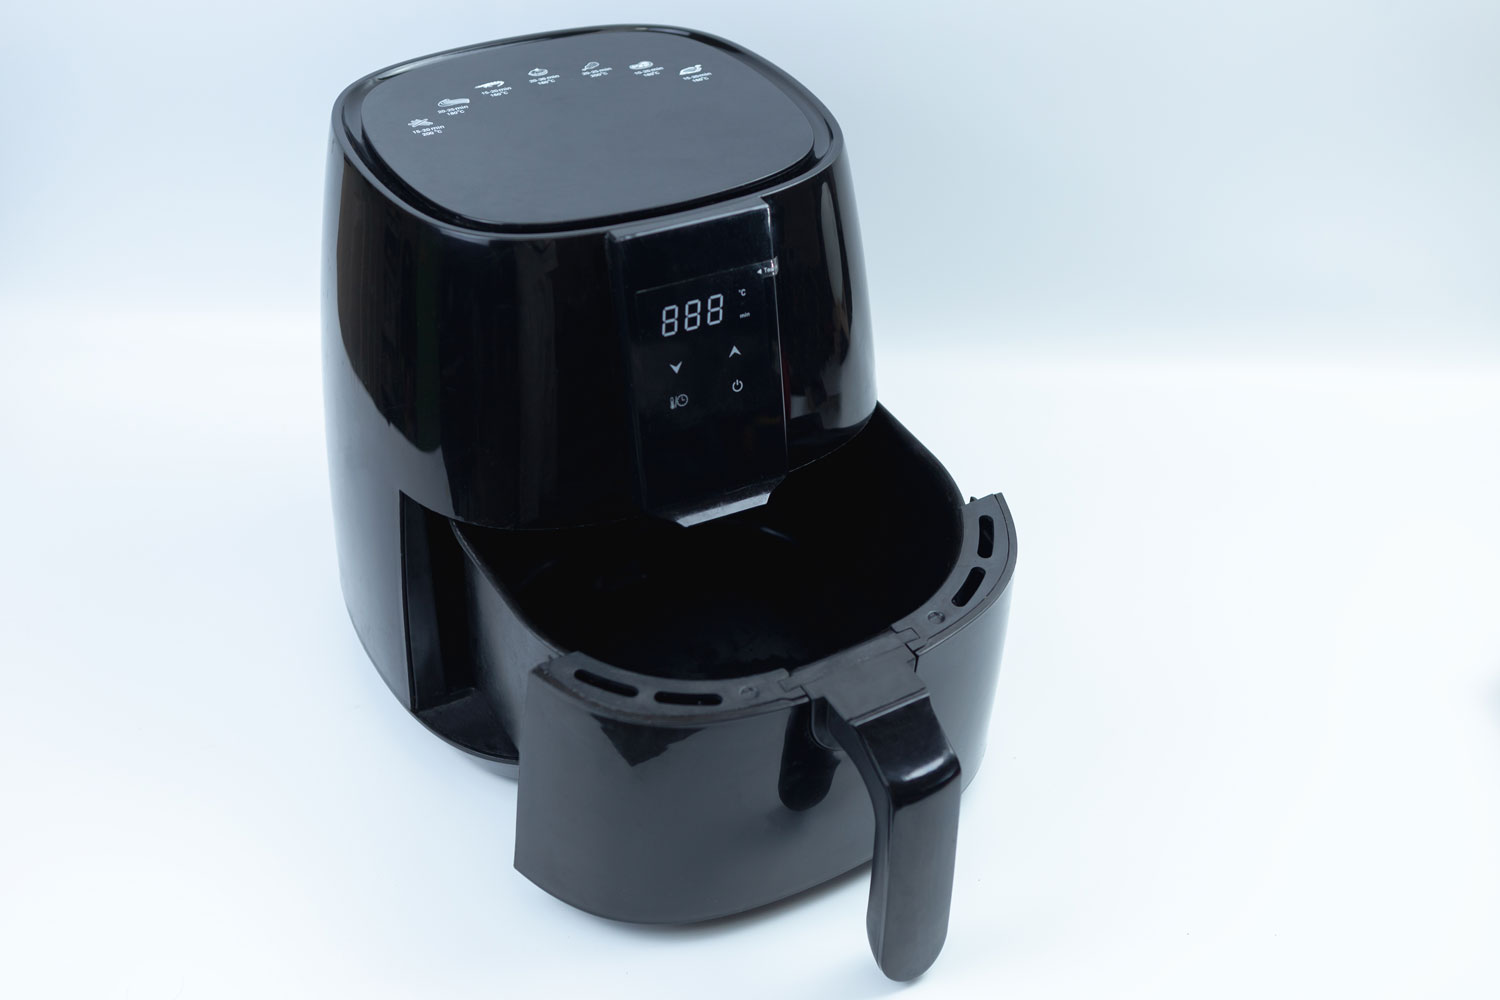 Black air fryer on a white background